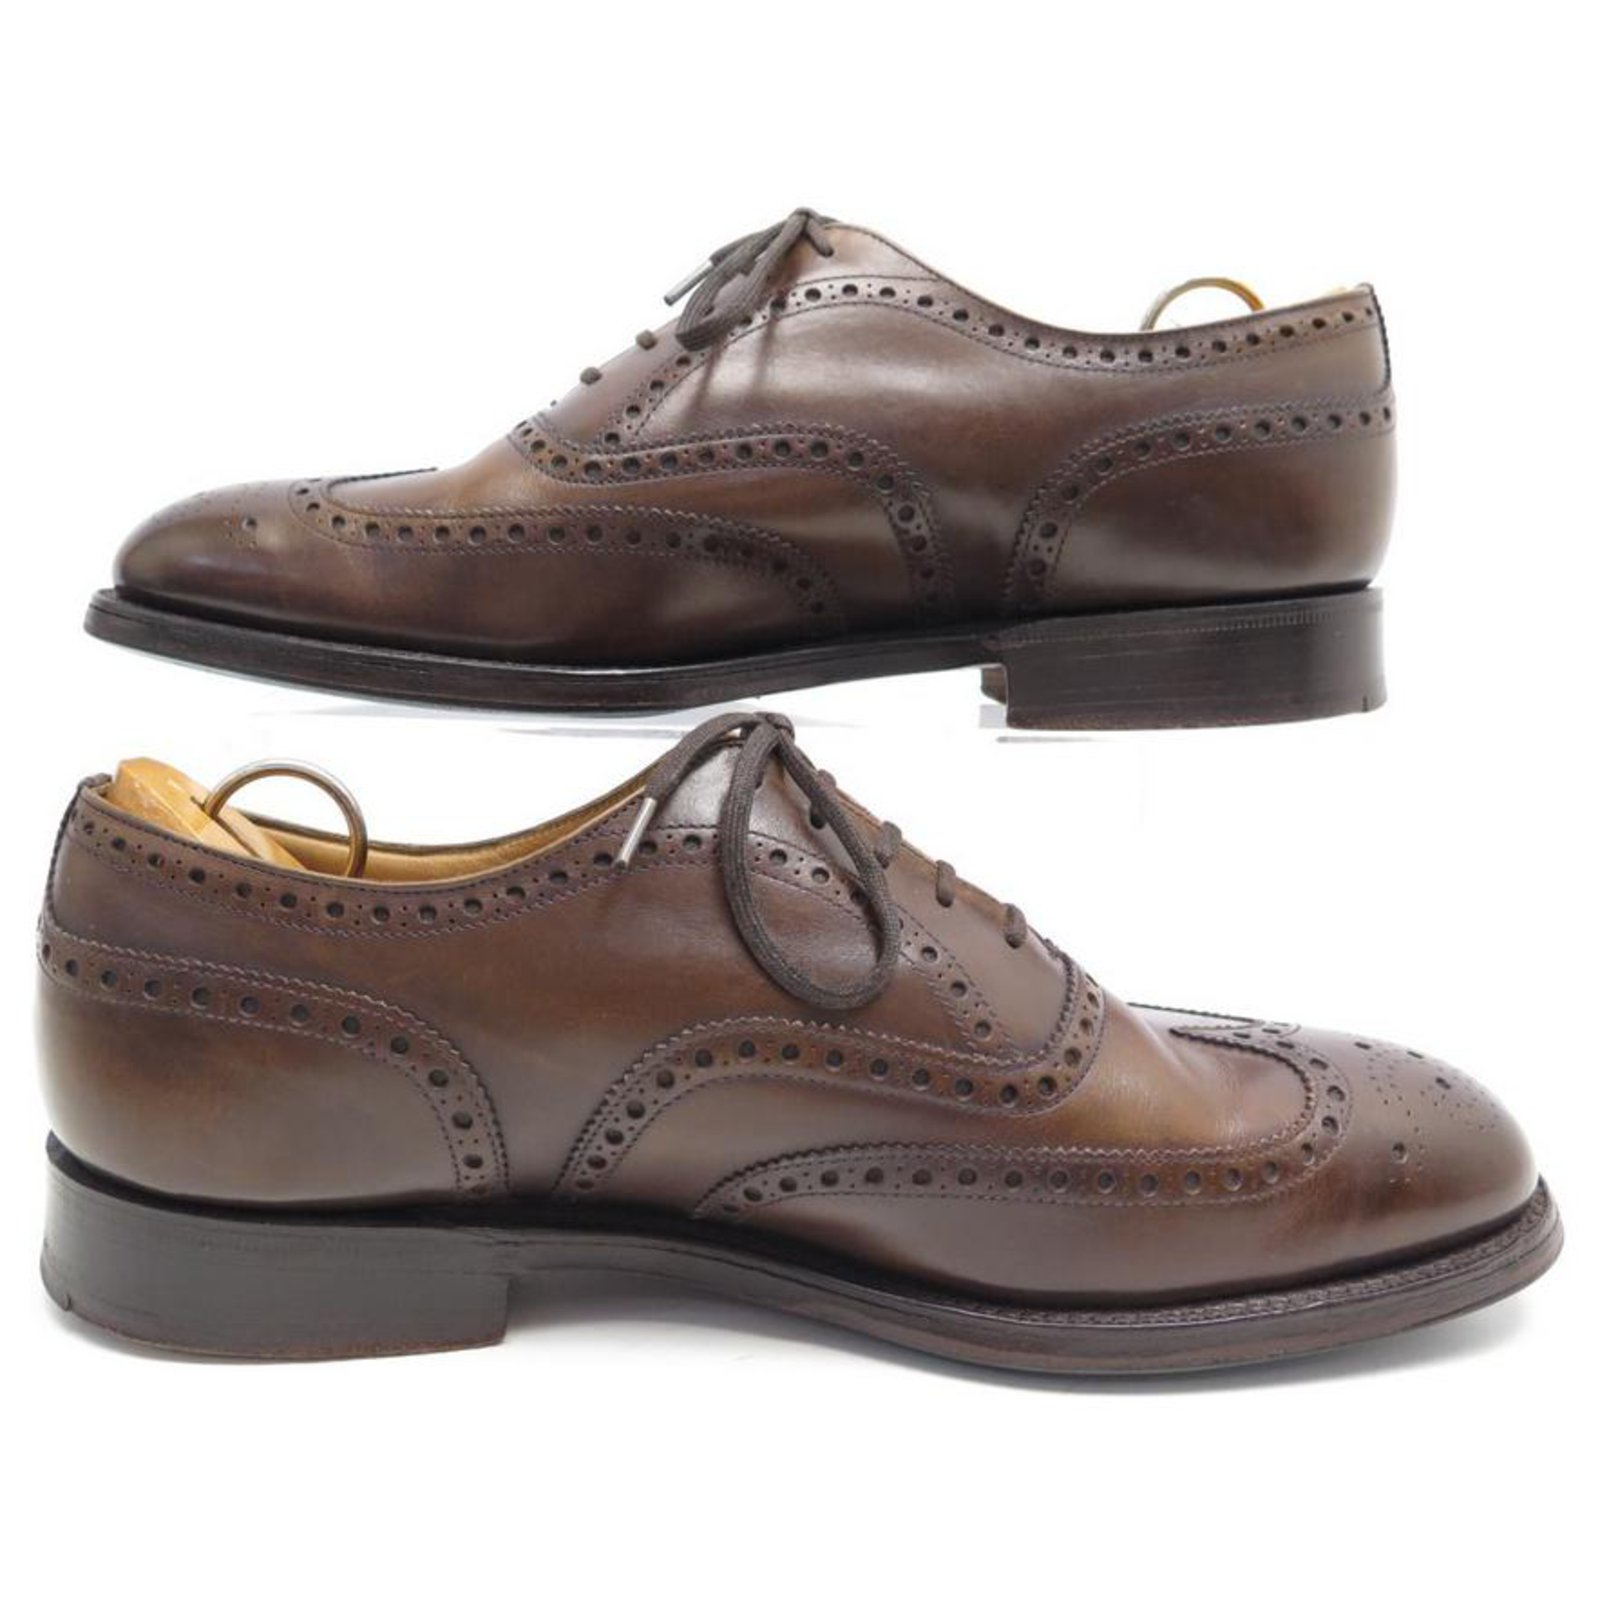 CHURCH'S CHETWYND RICHELIEU SHOES 6.5g 40.5 Wide 41 Brown leather